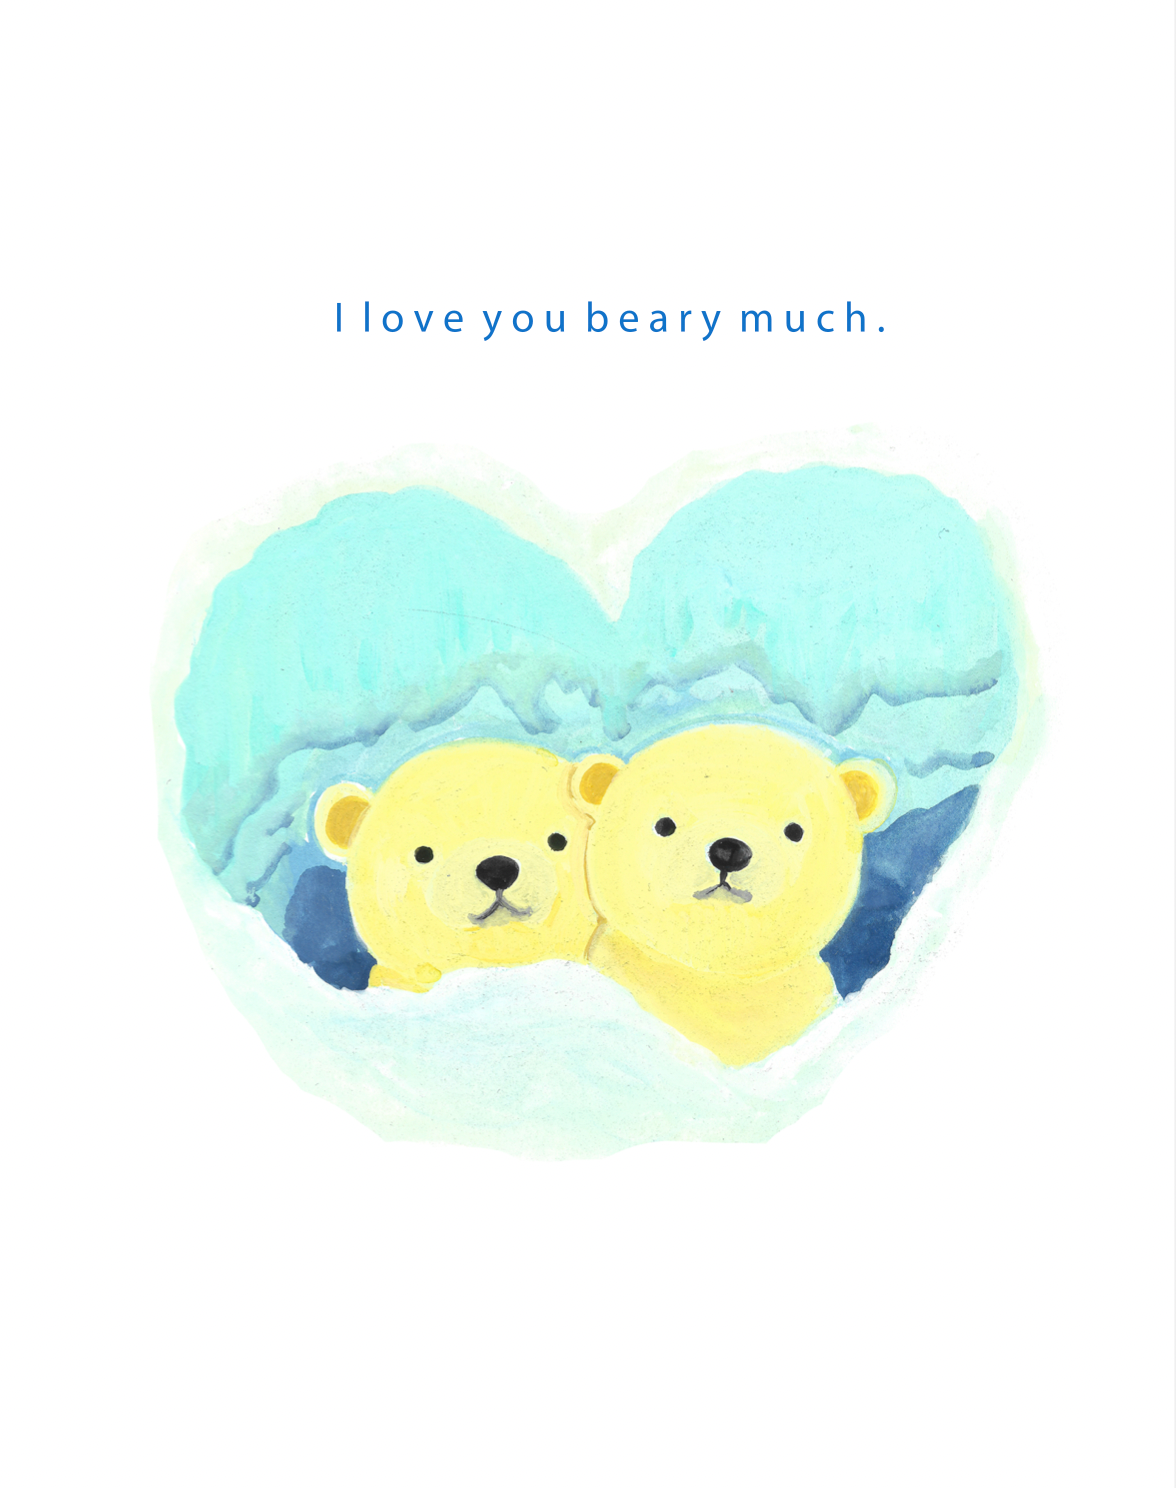 'I love you beary much' Greeting Card